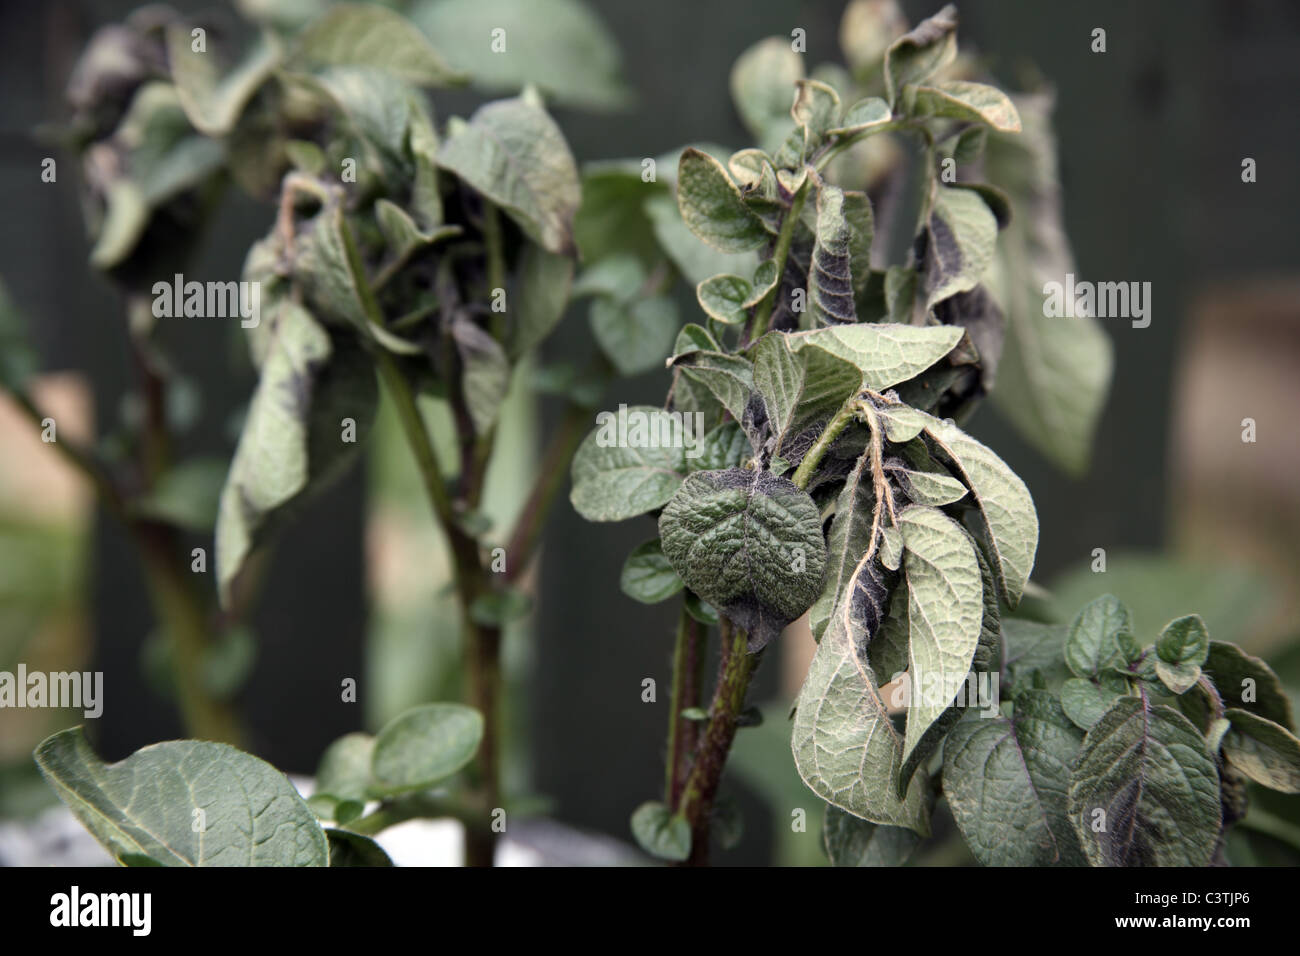 Frost Damaged Red Duke of York Potato Plants on an Allotment Stock Photo